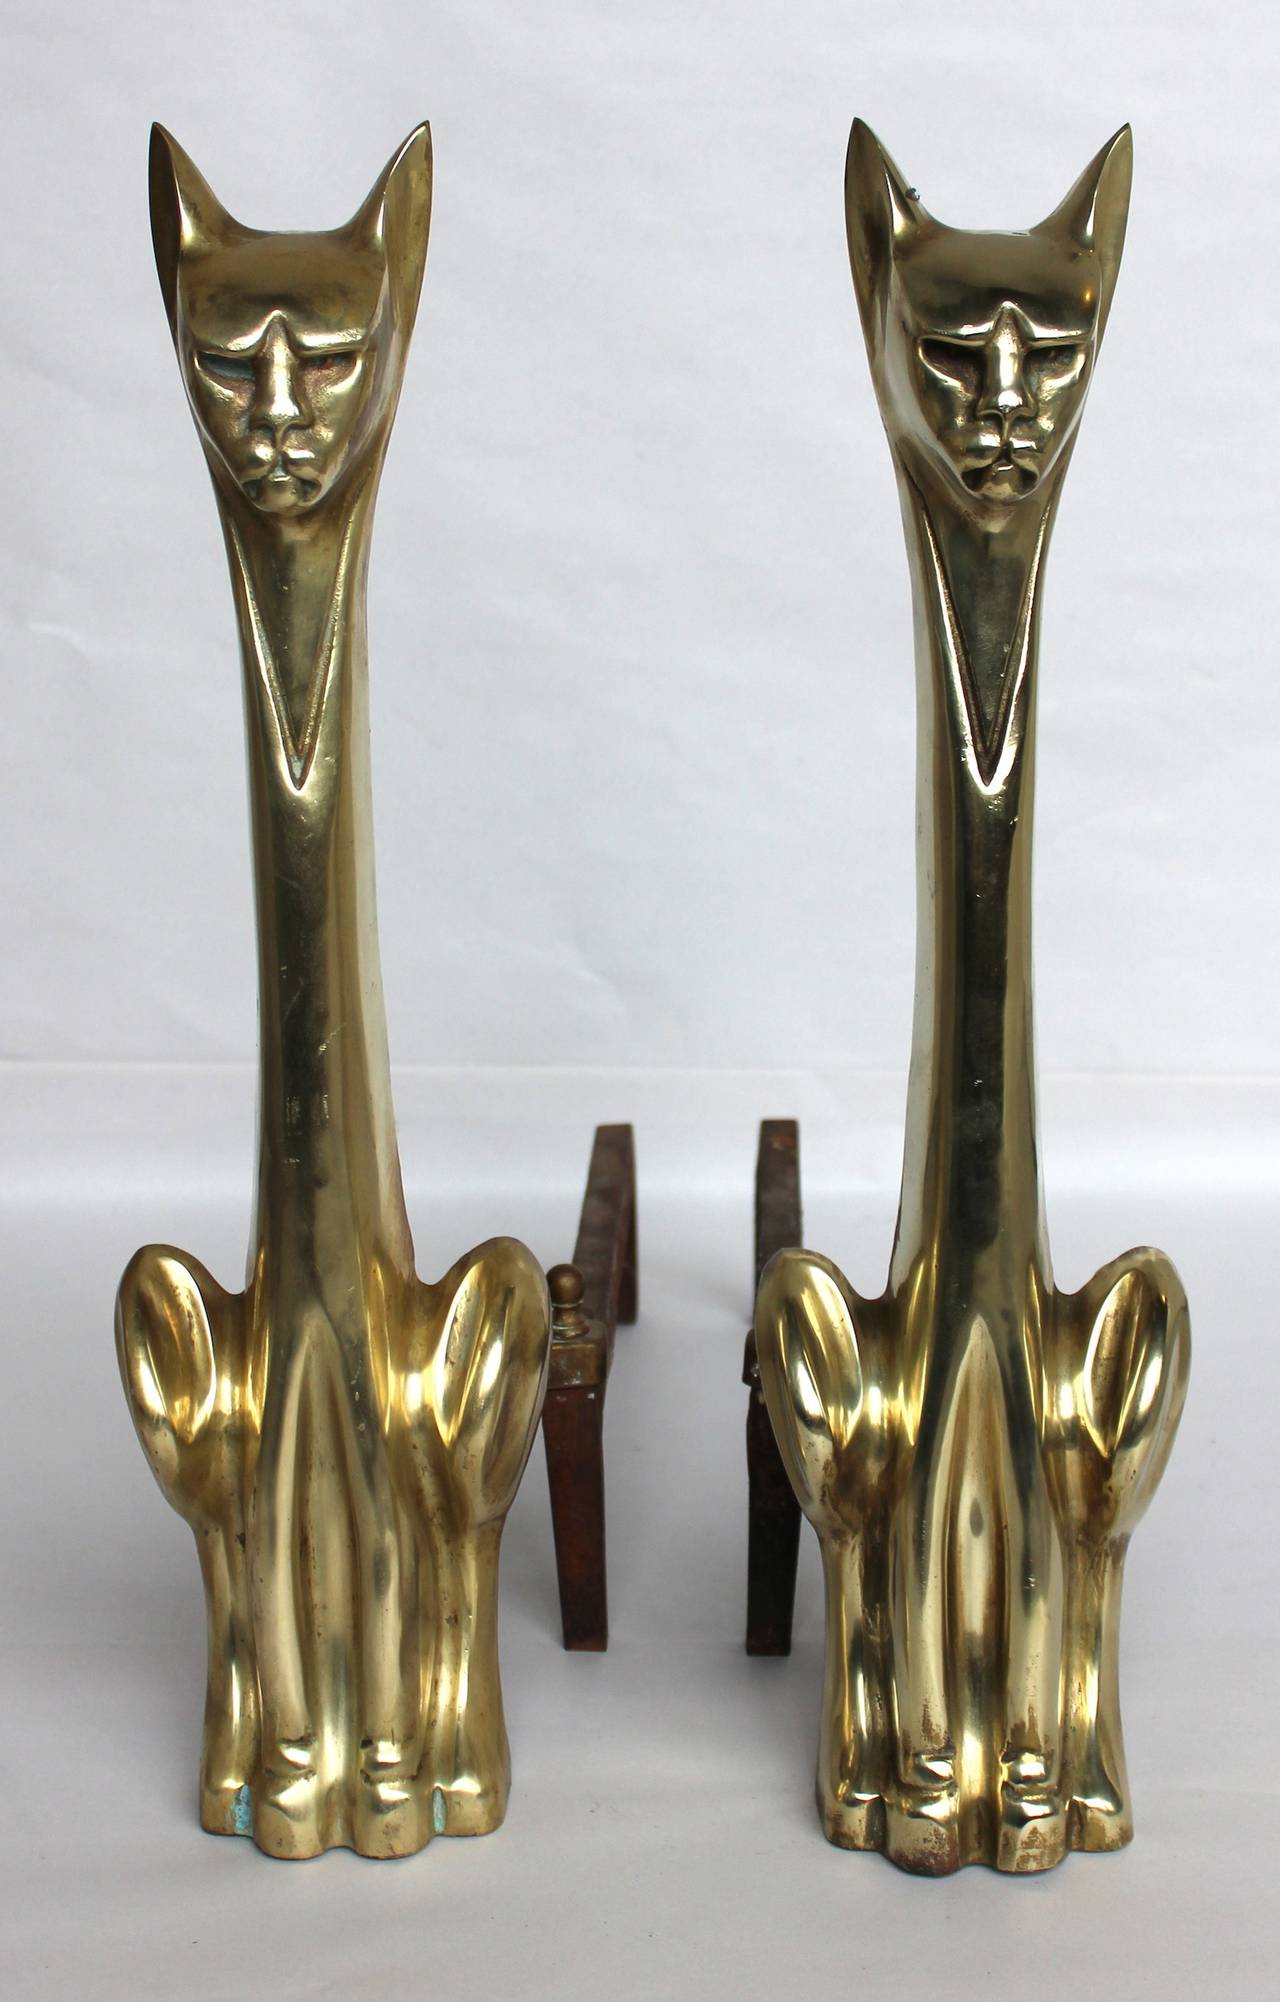 A vintage pair of andirons in the form of two stylized brass cats. Good vintage condition with age appropriate patina.